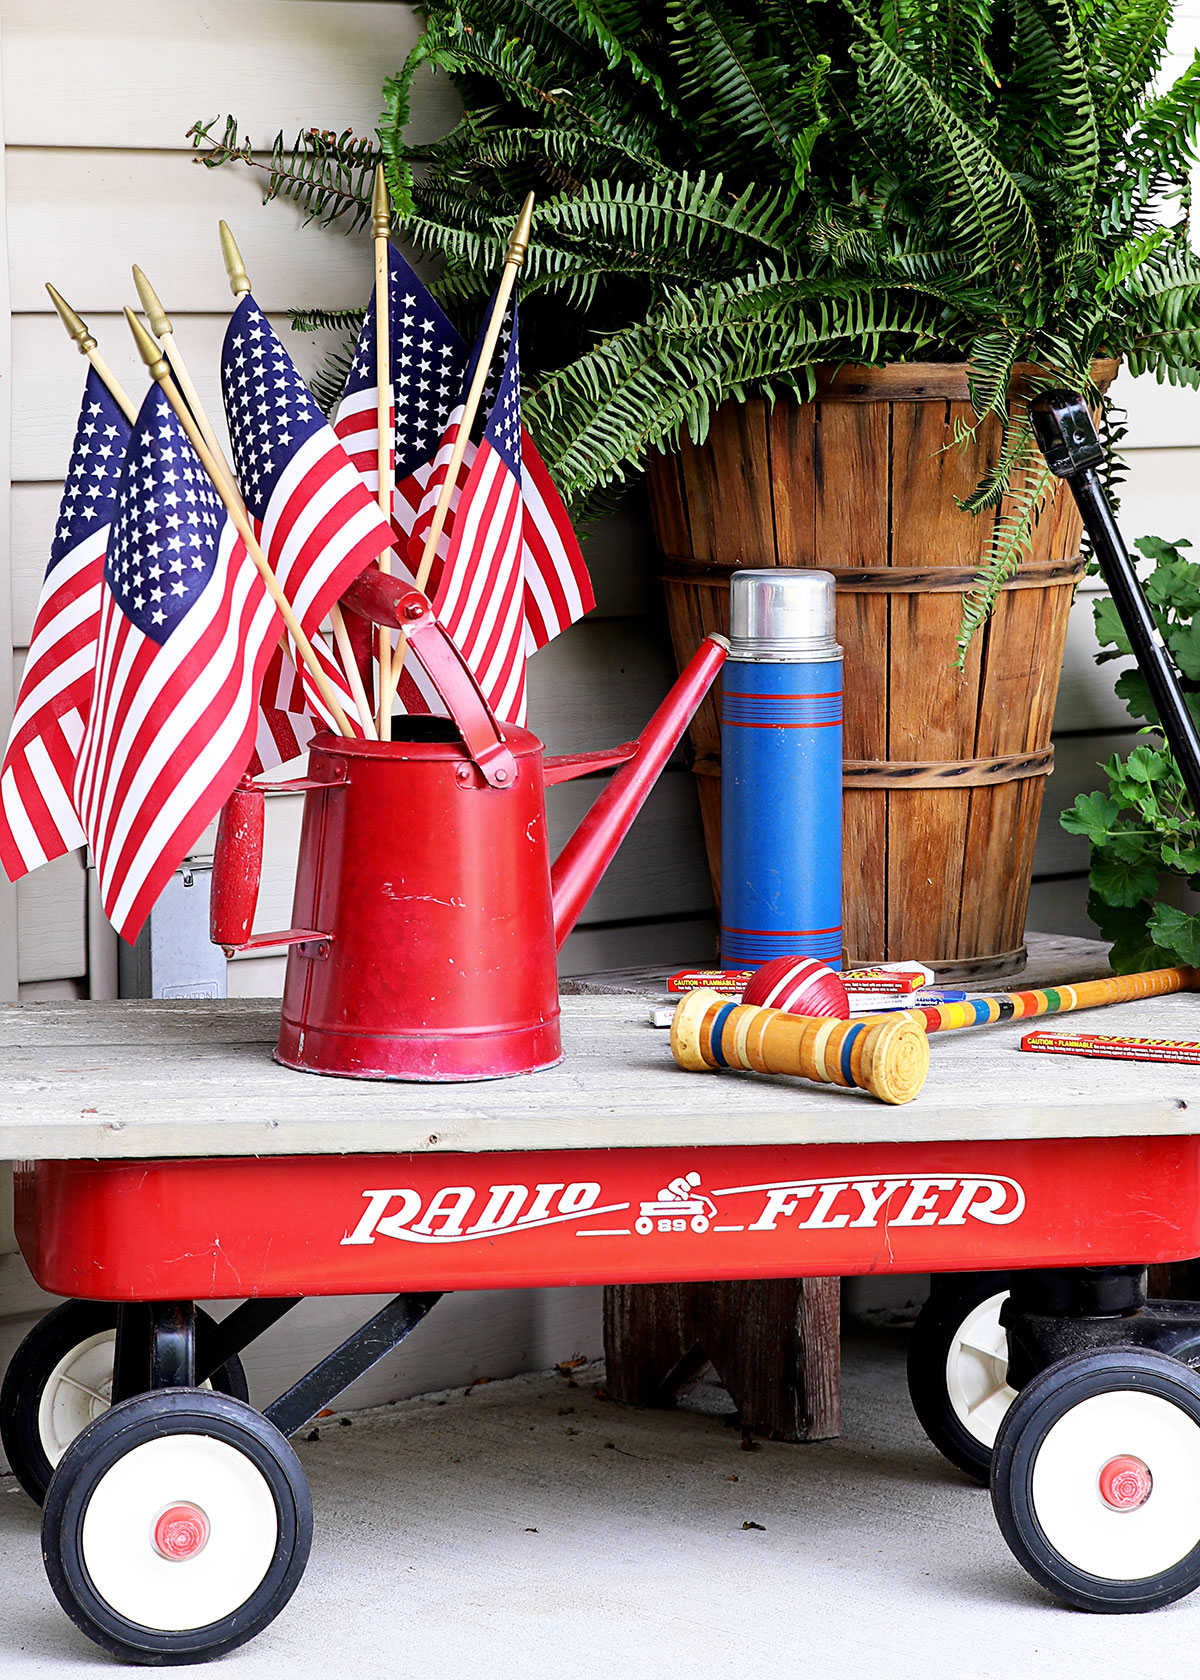 A radio flyer wagon with a watering can full of American flags.